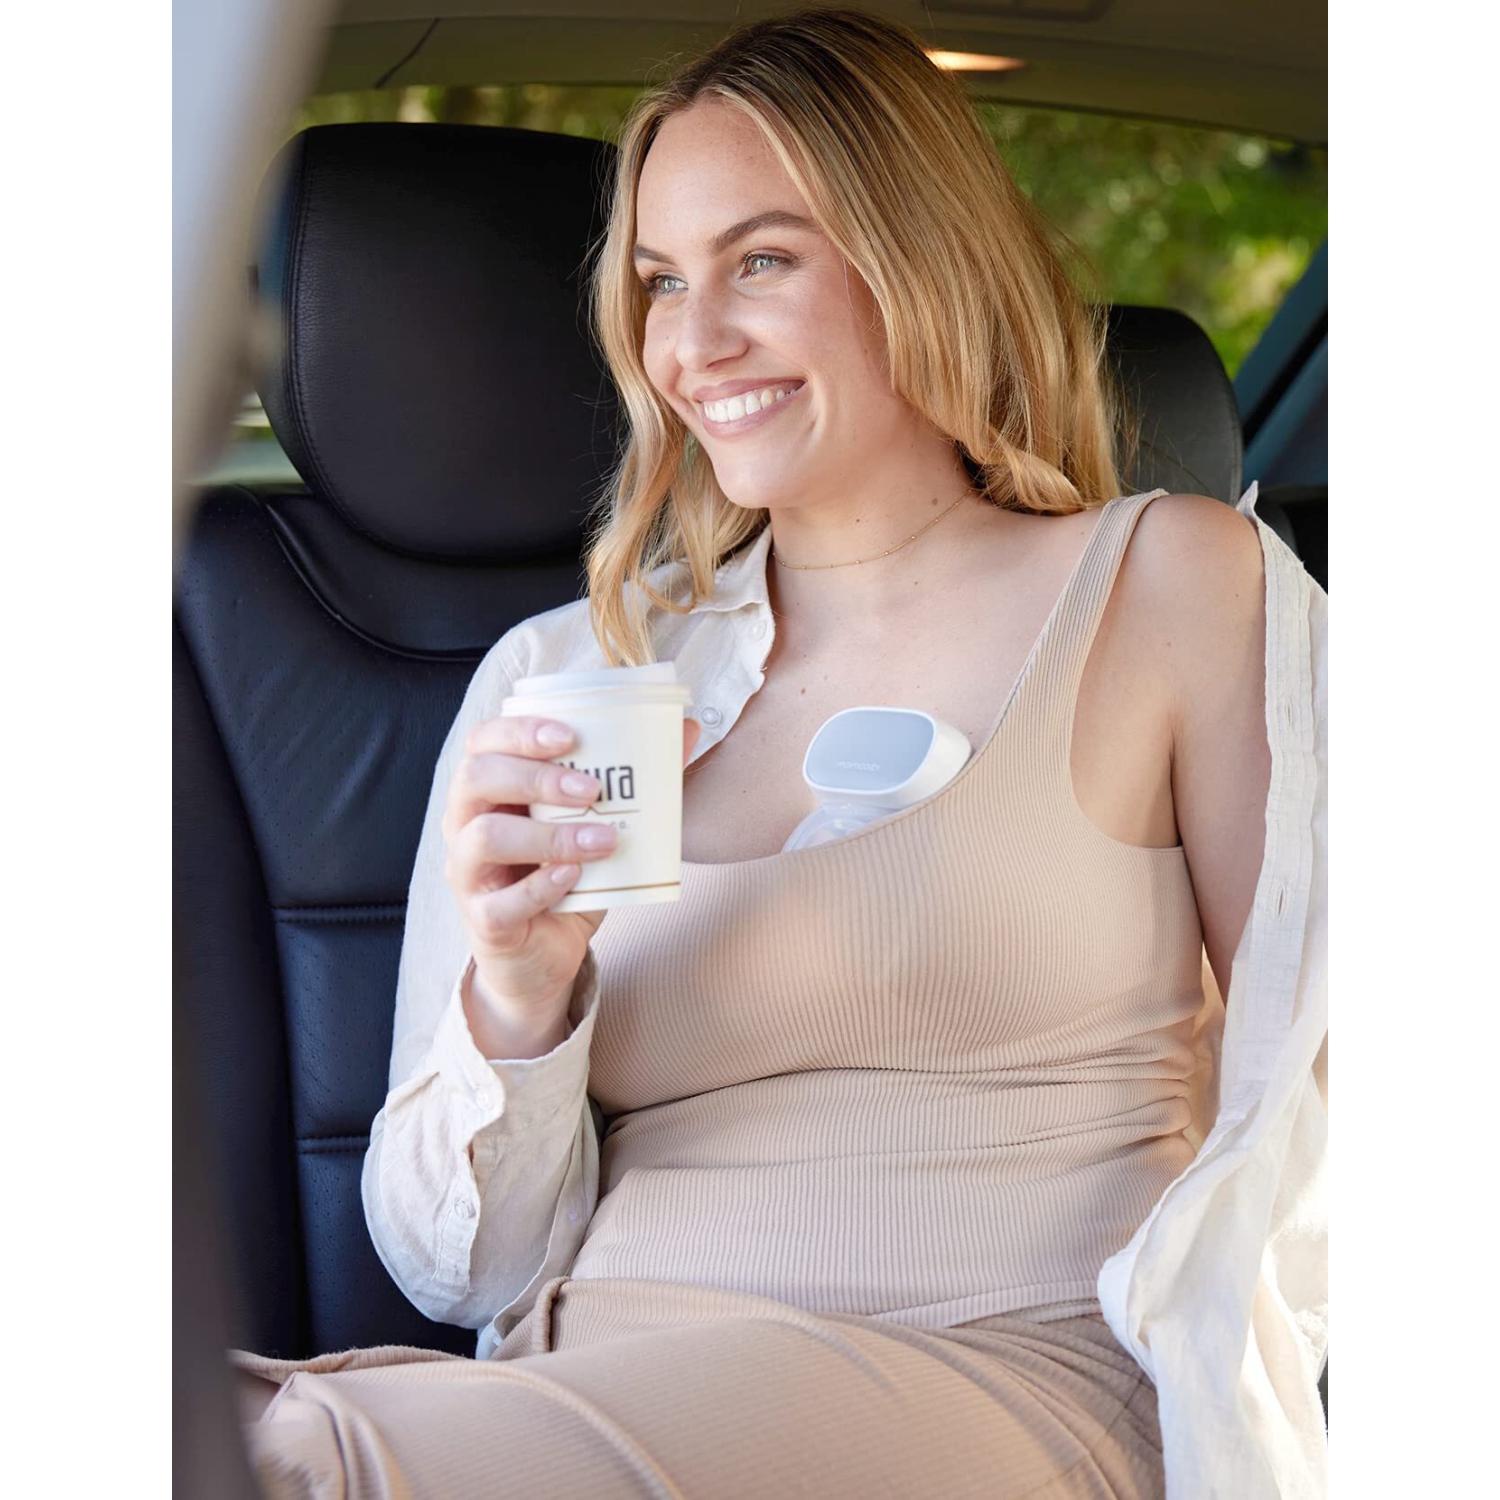 Momcozy S9 Pro Double Electric Breast Pump USB Silent Wearable Hands-Free  Sealed